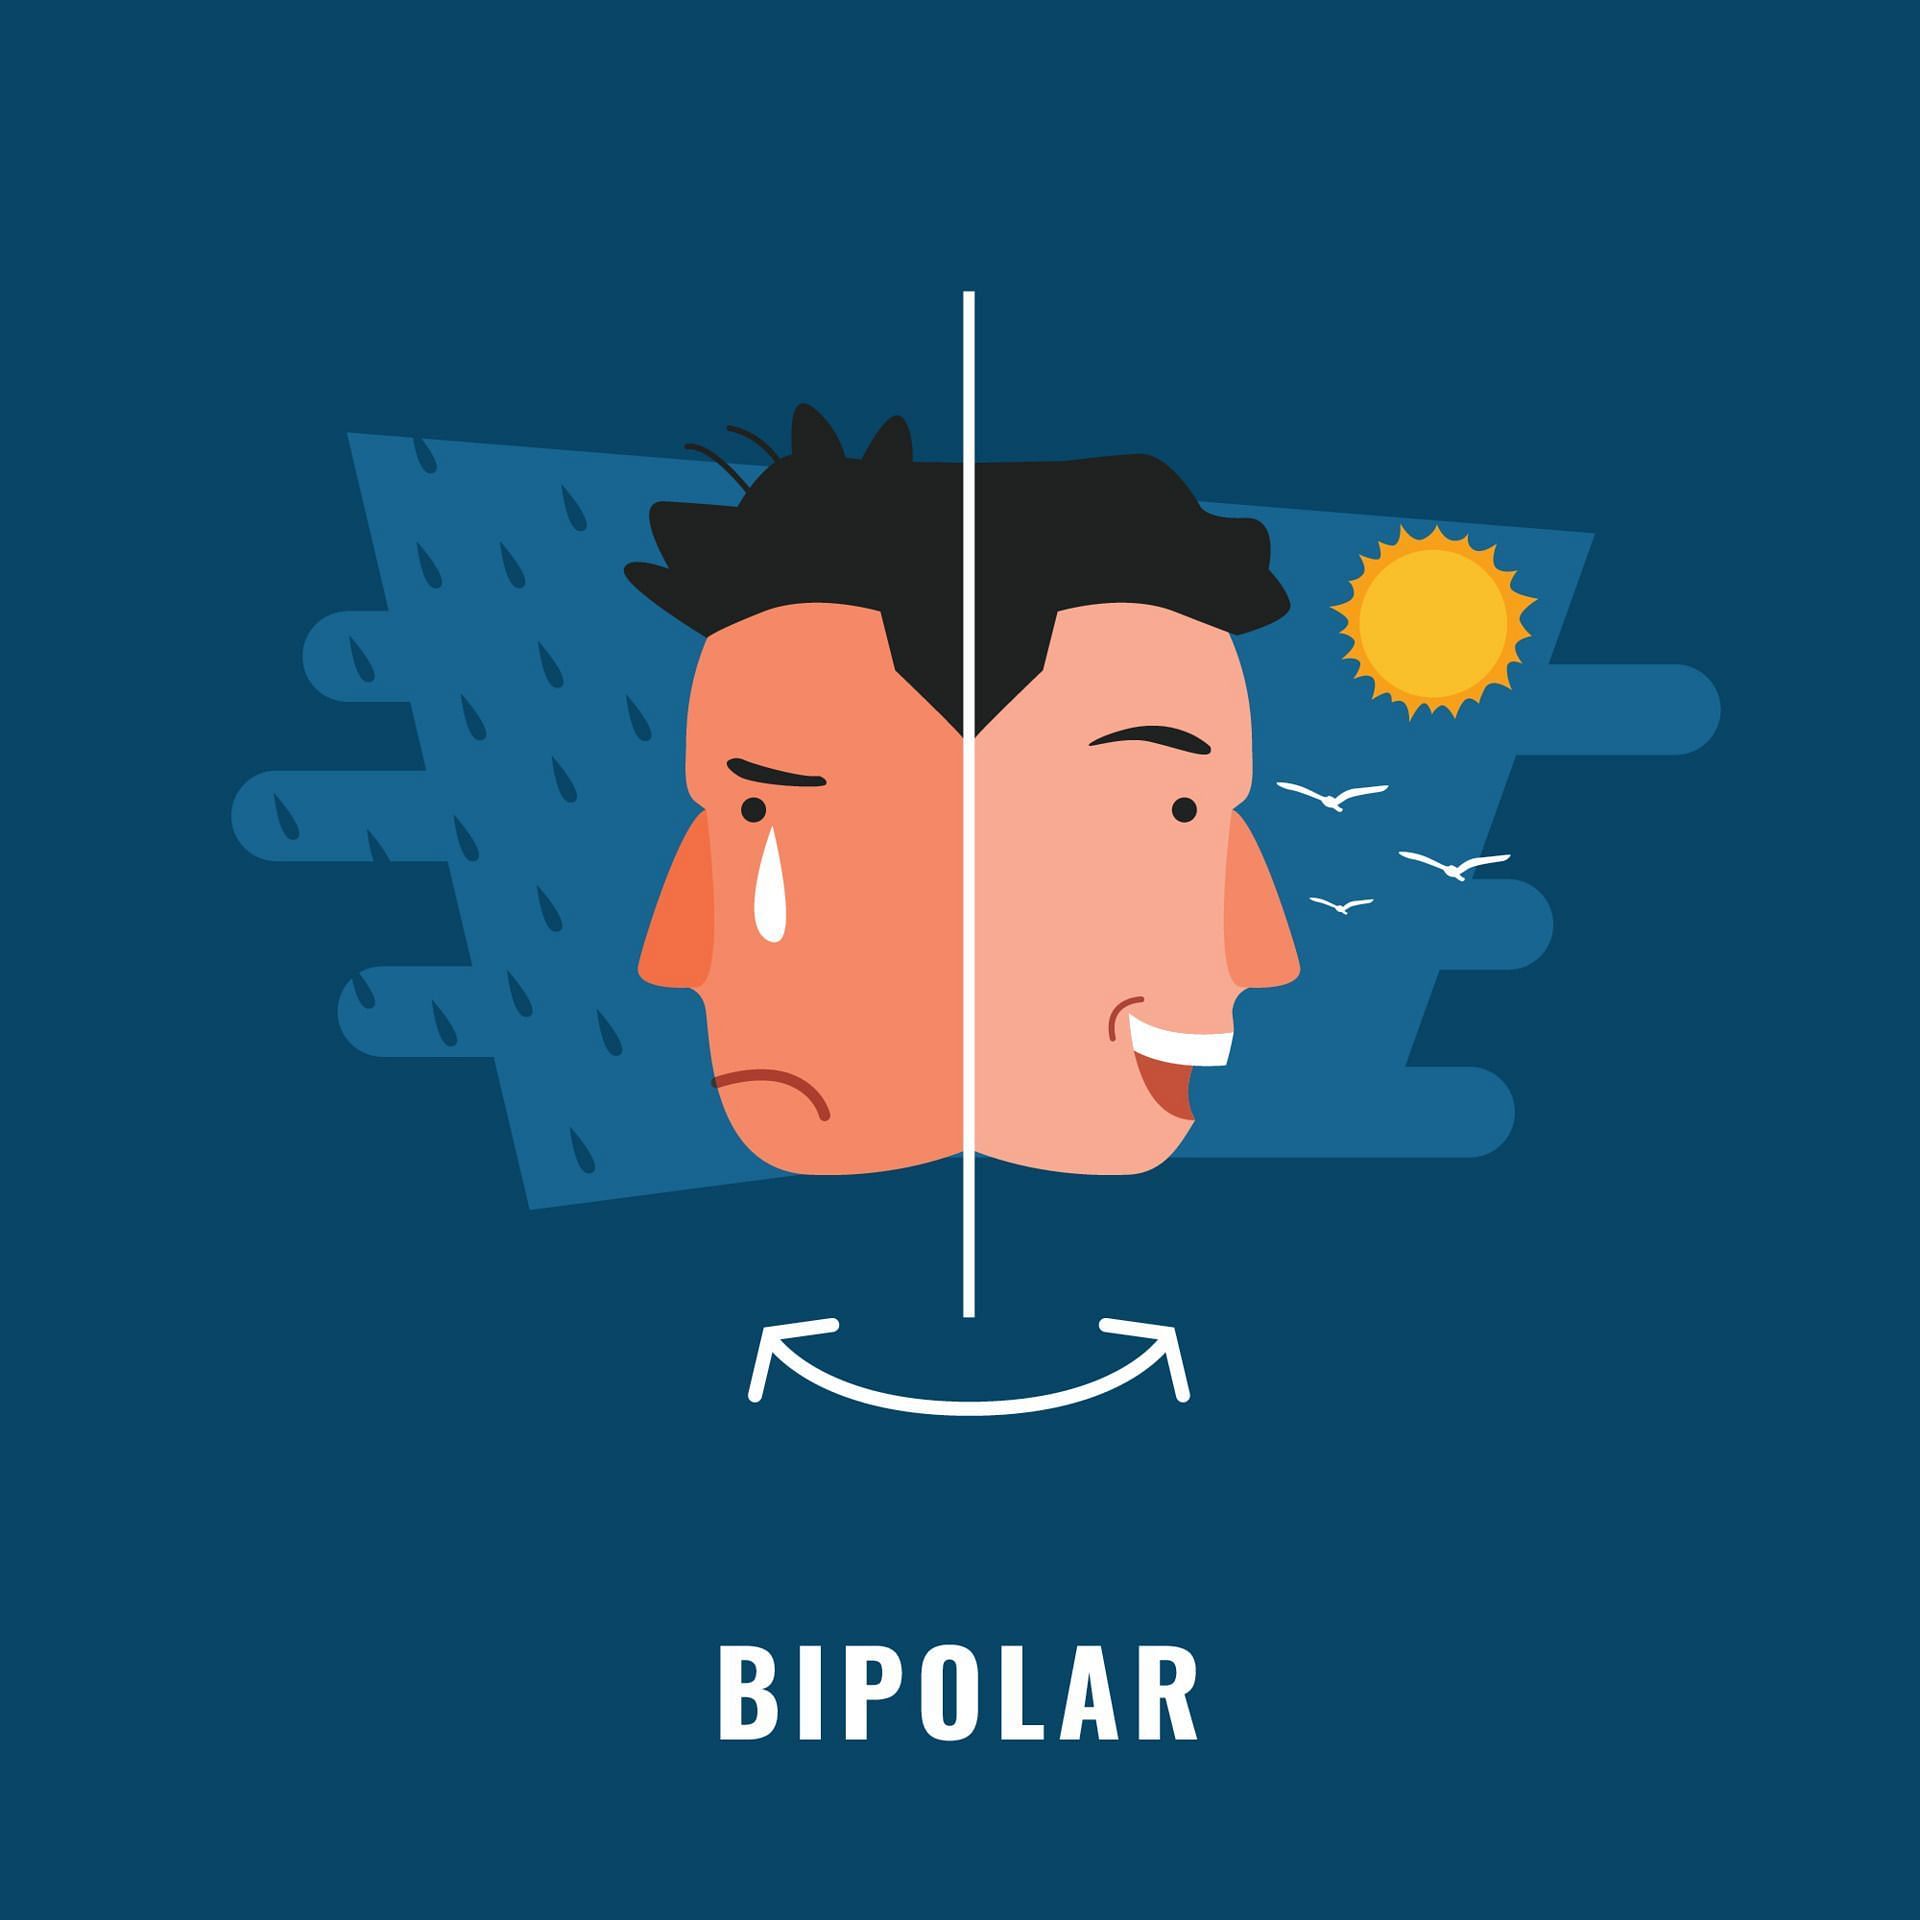 There are various facts about bipolar disorder that can dispel myths. (Image via Vecteezy/ Bonezboyz)